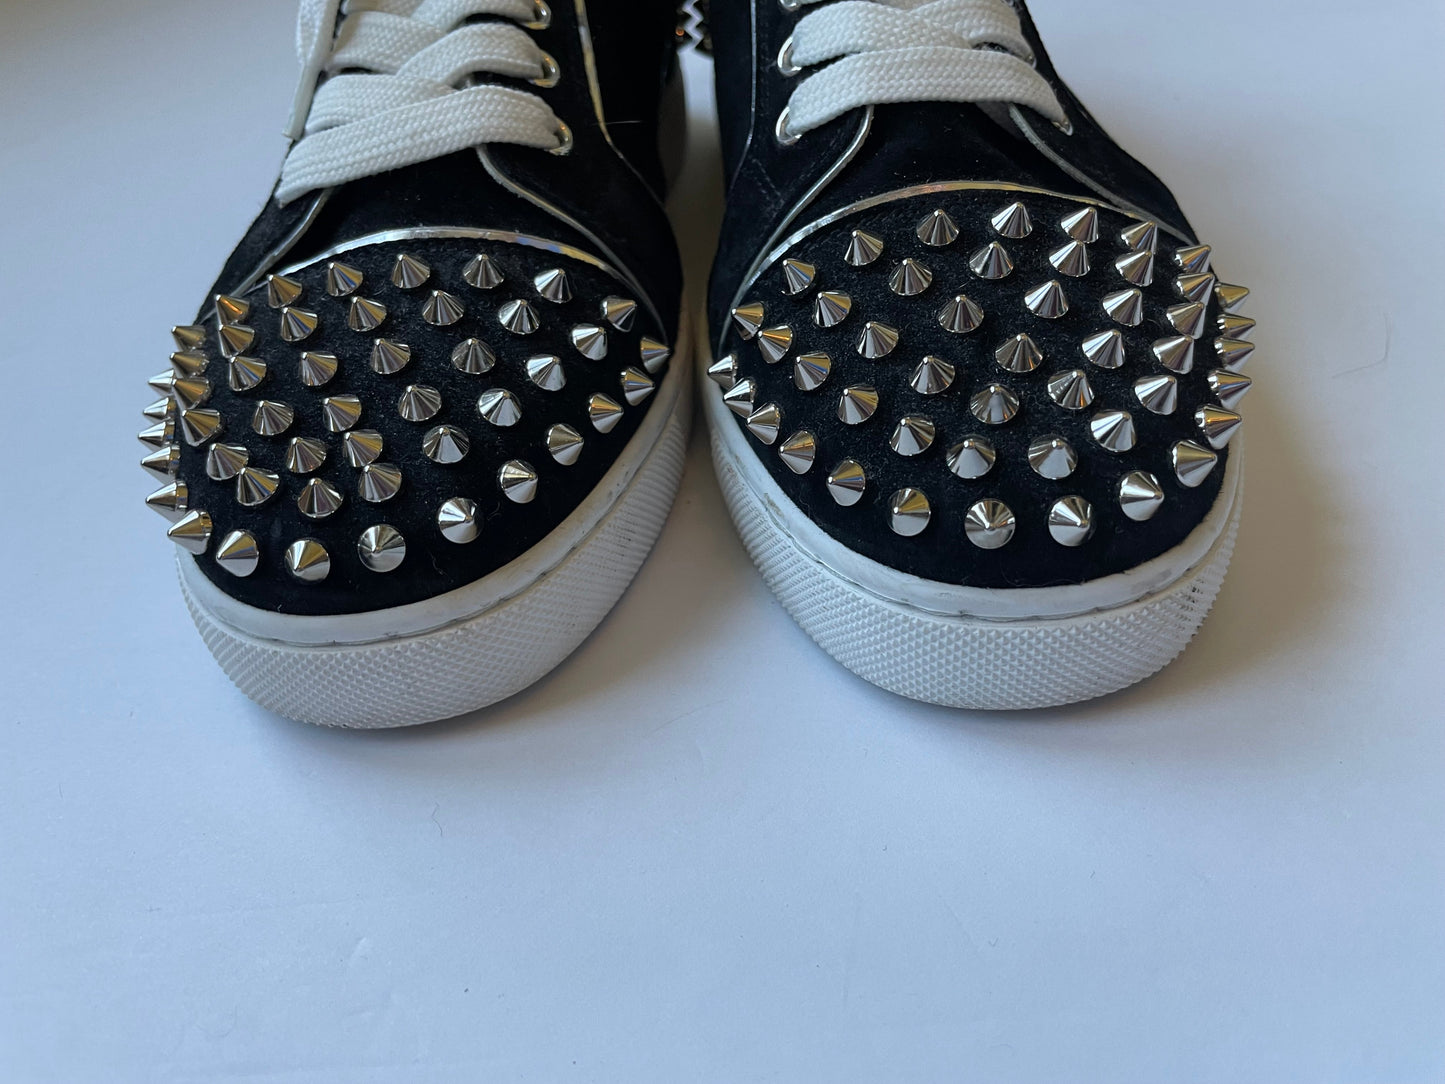 Shoes Sneakers By Christian Louboutin  Size: 8.5